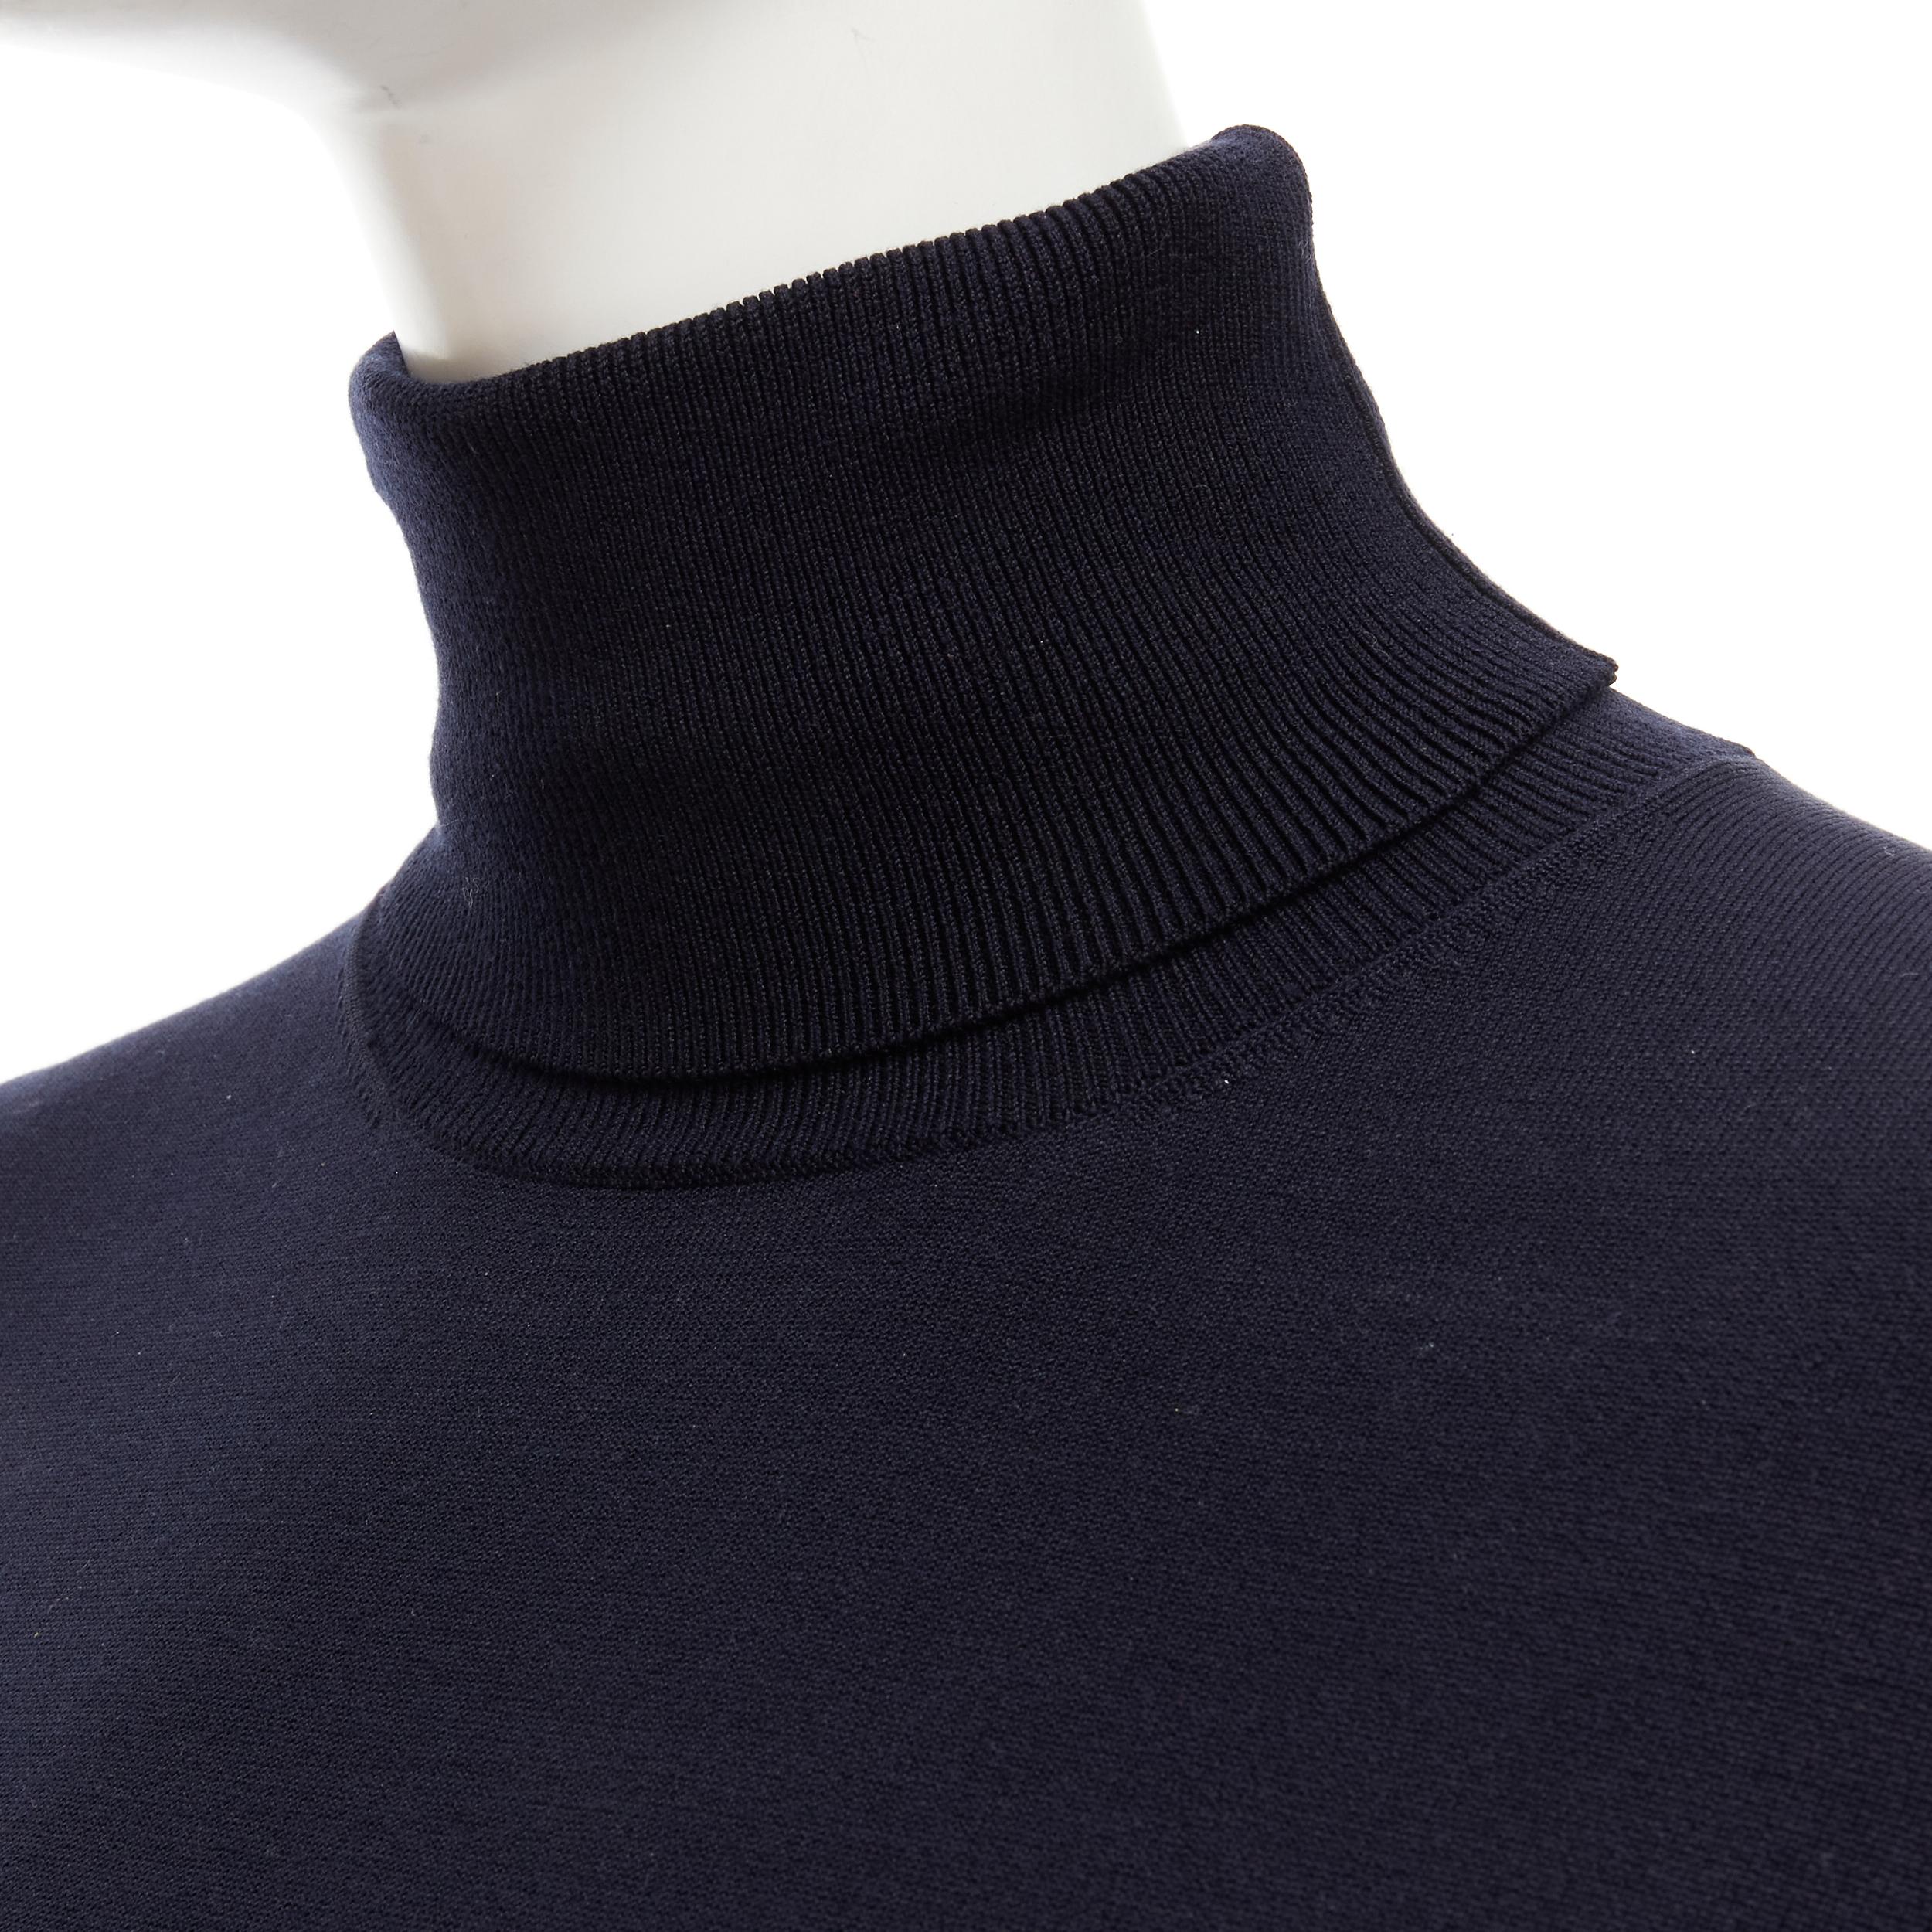 KORS MICHAEL KORS navy blue silk nylon knit long sleeve turtleneck sweater S 
Reference: LNKO/A01863 
Brand: Michael Kors 
Collection: KORS by Michael Kors 
Material: Silk 
Color: Navy 
Pattern: Solid 
Extra Detail: Tonal stitching detail at